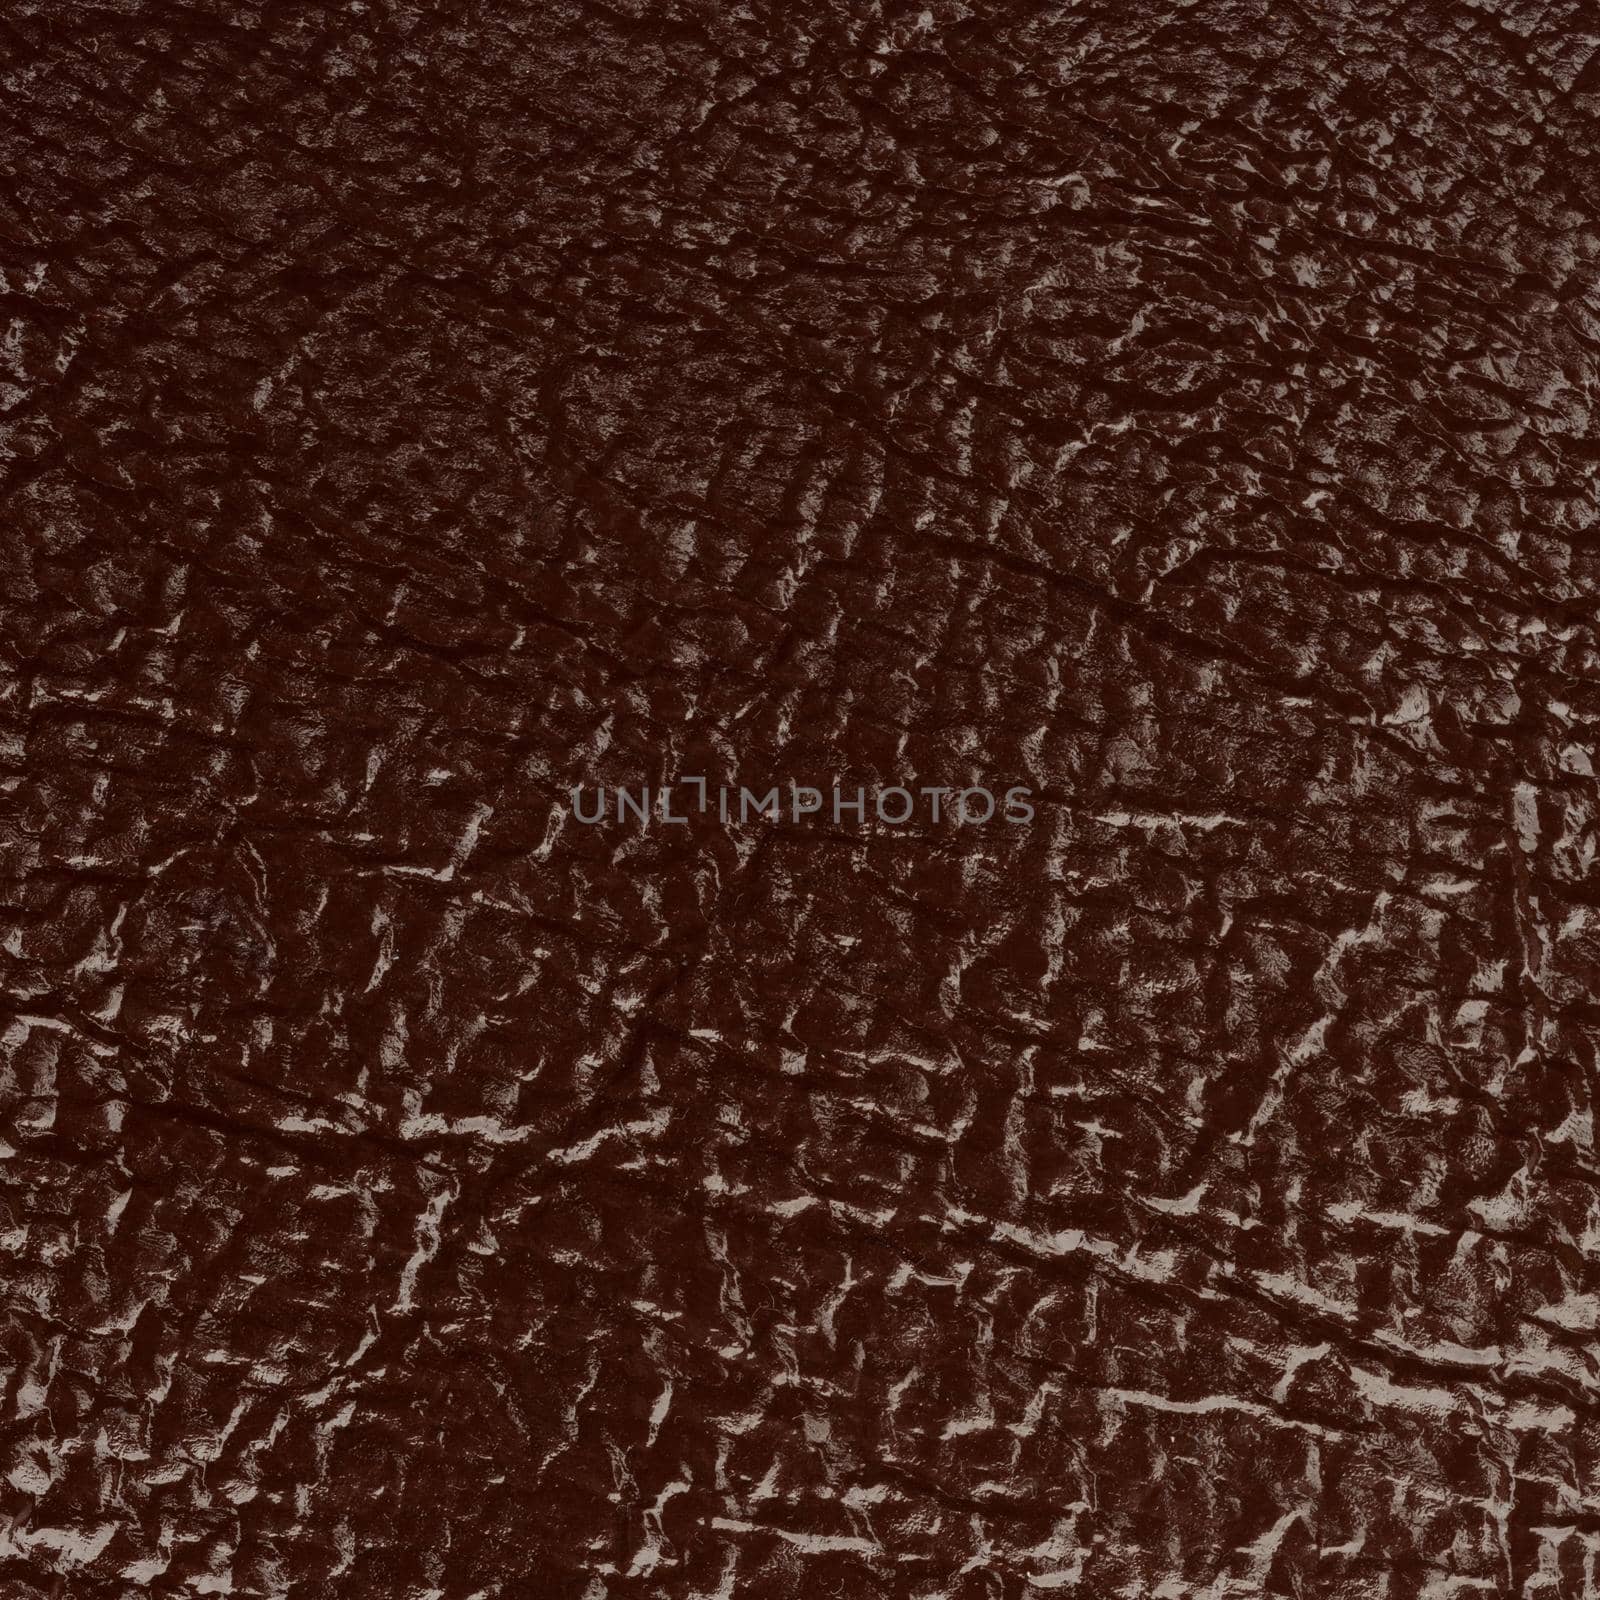 Brown leather texture macro shot - useful as background